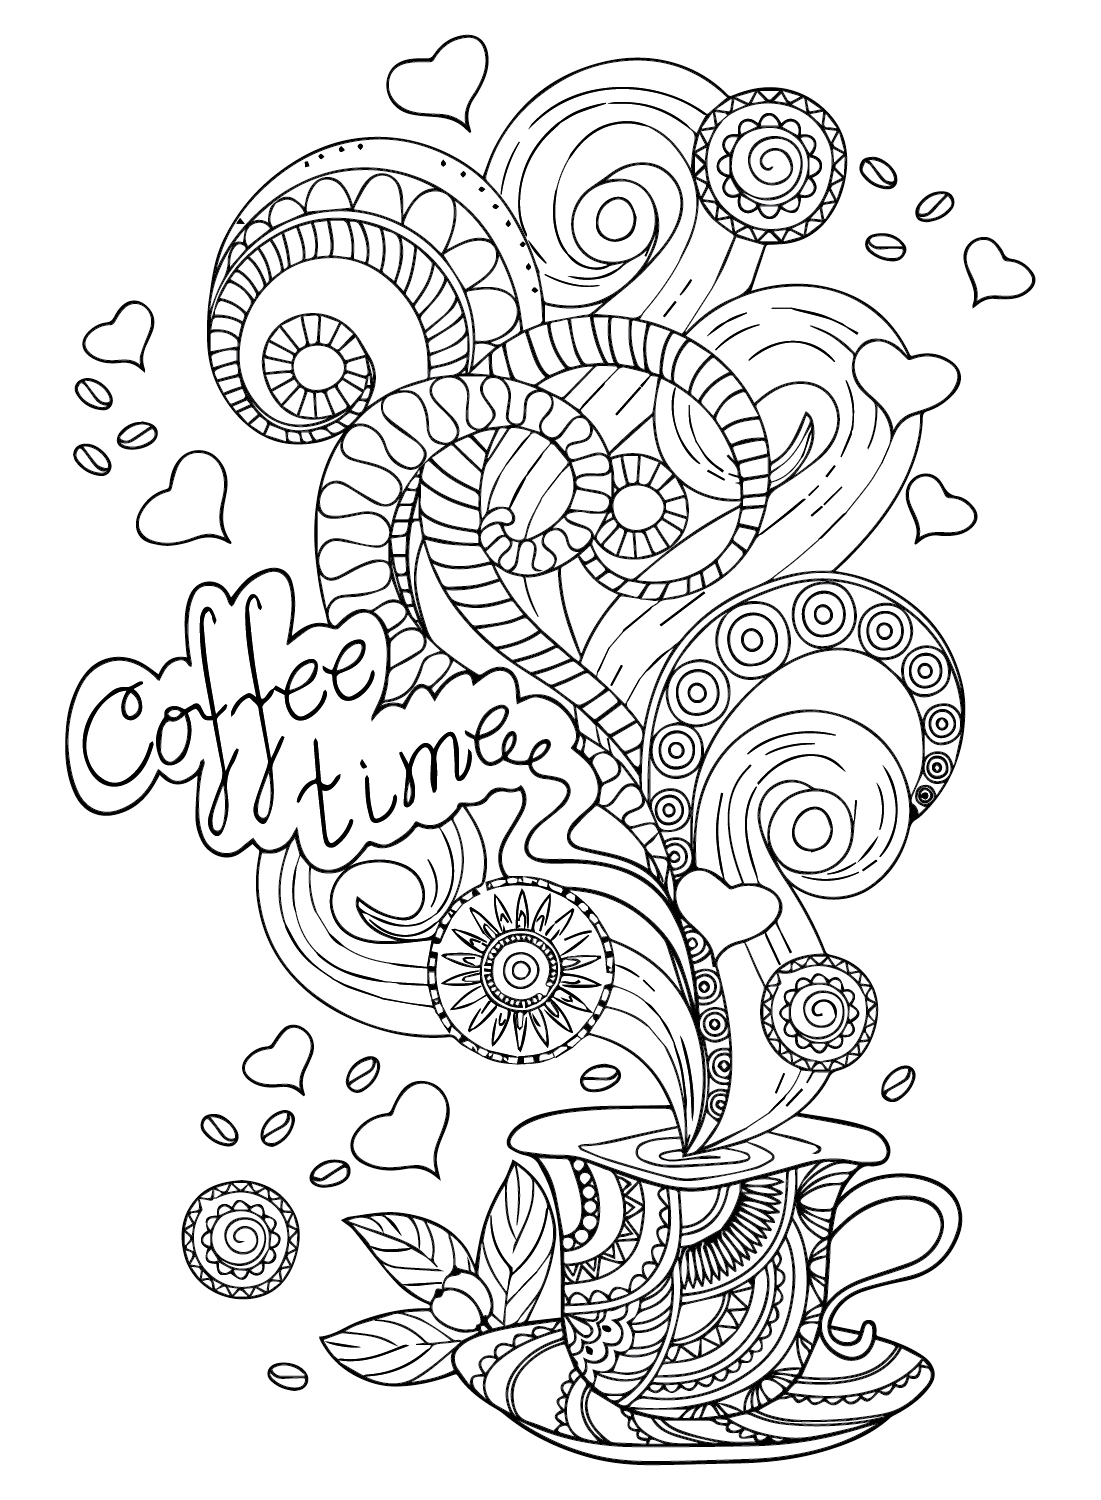 Flavor Coffee Coloring Pages